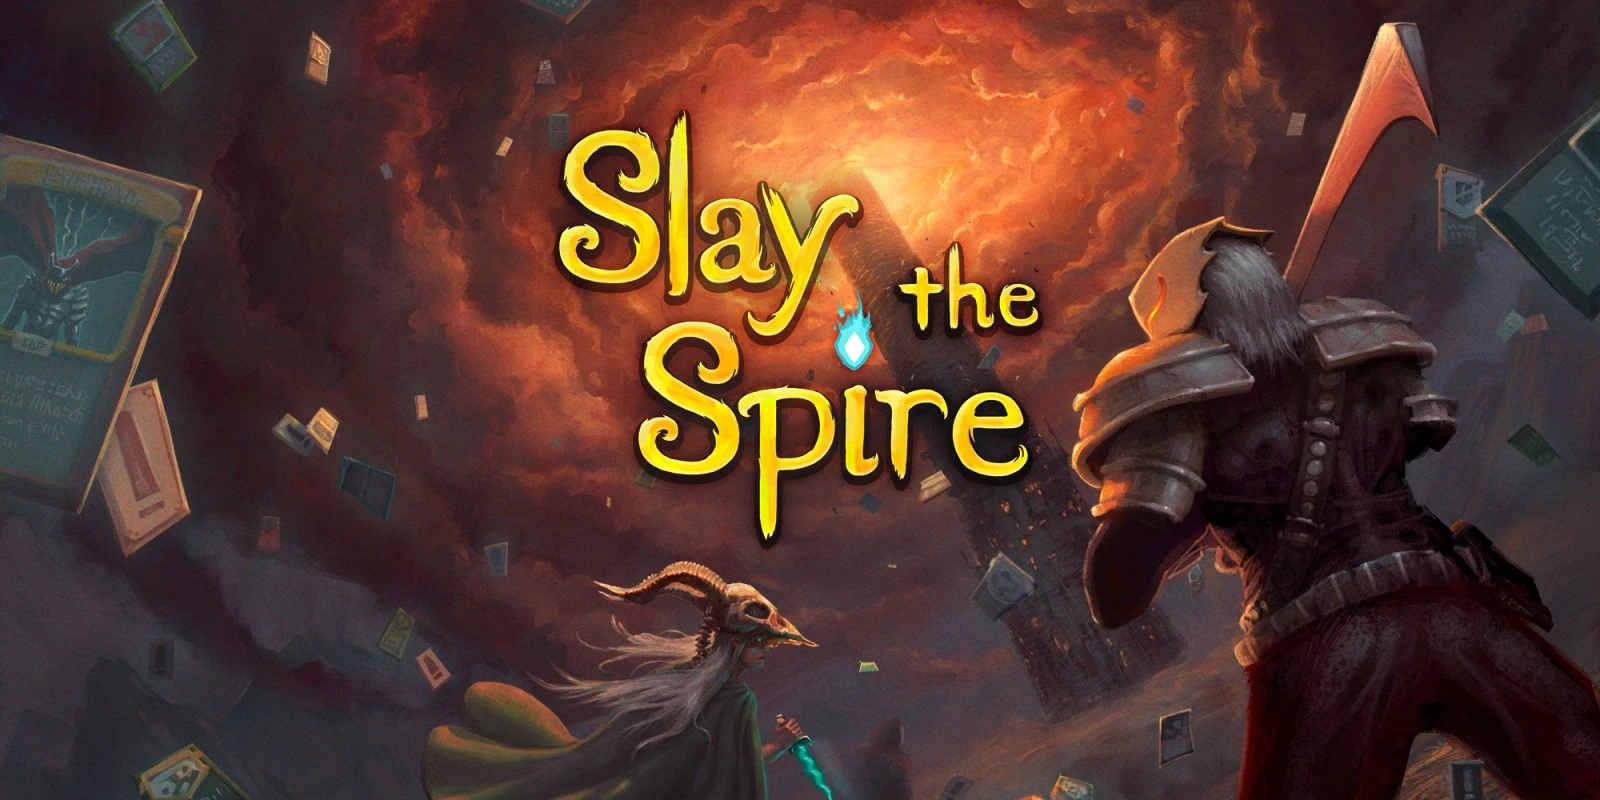 Slay the Spire APK: Everything You Need to Know